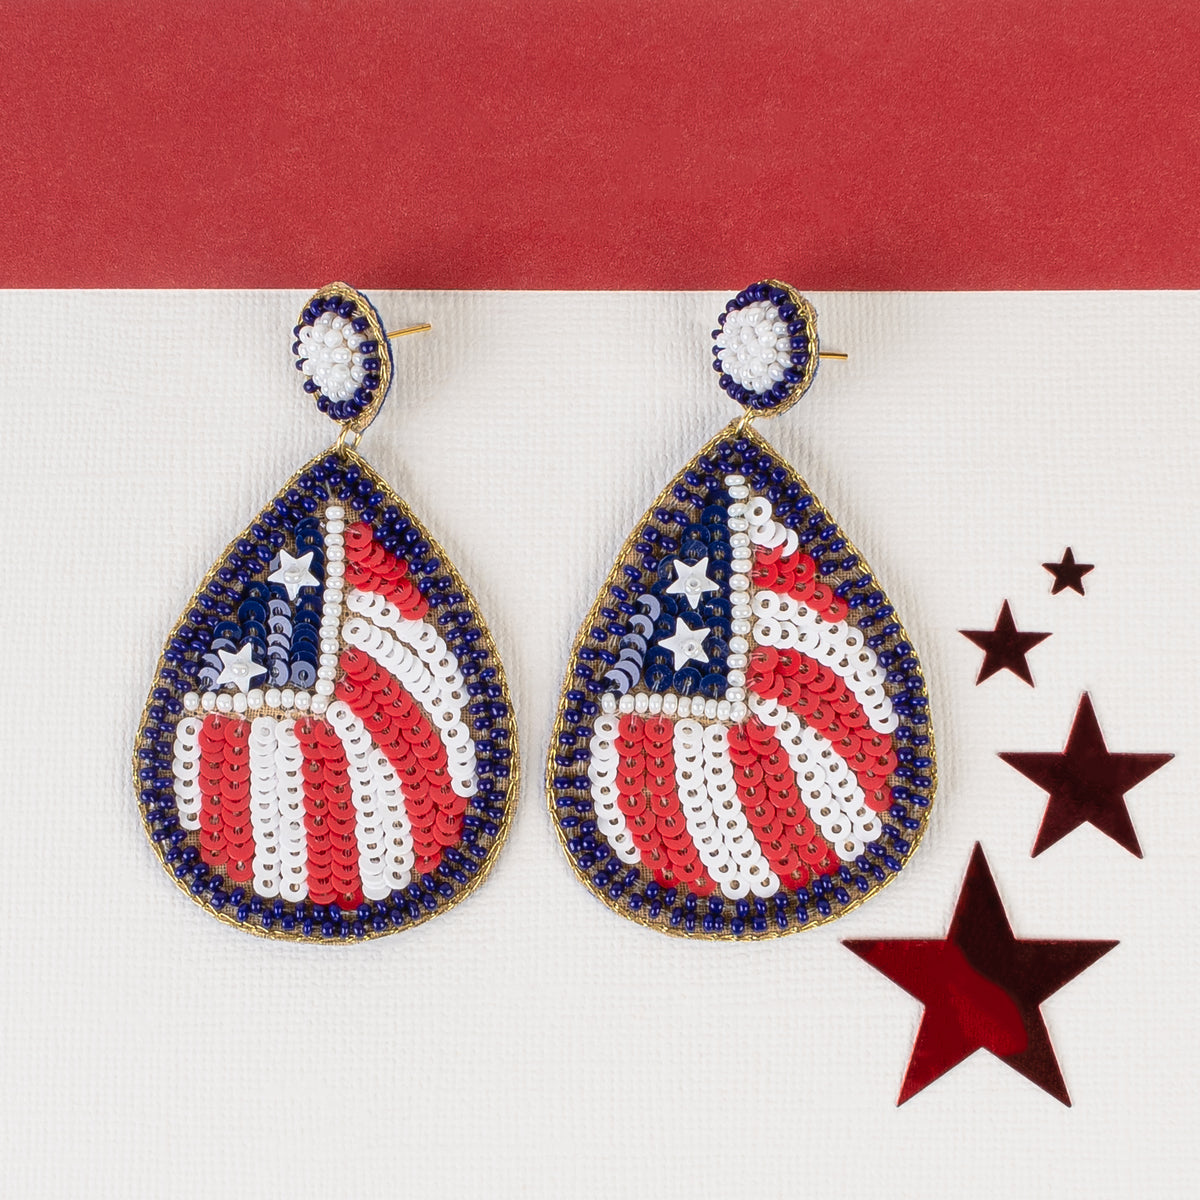 1536 - Stars and Stripes Earrings - Red, White, & Blue